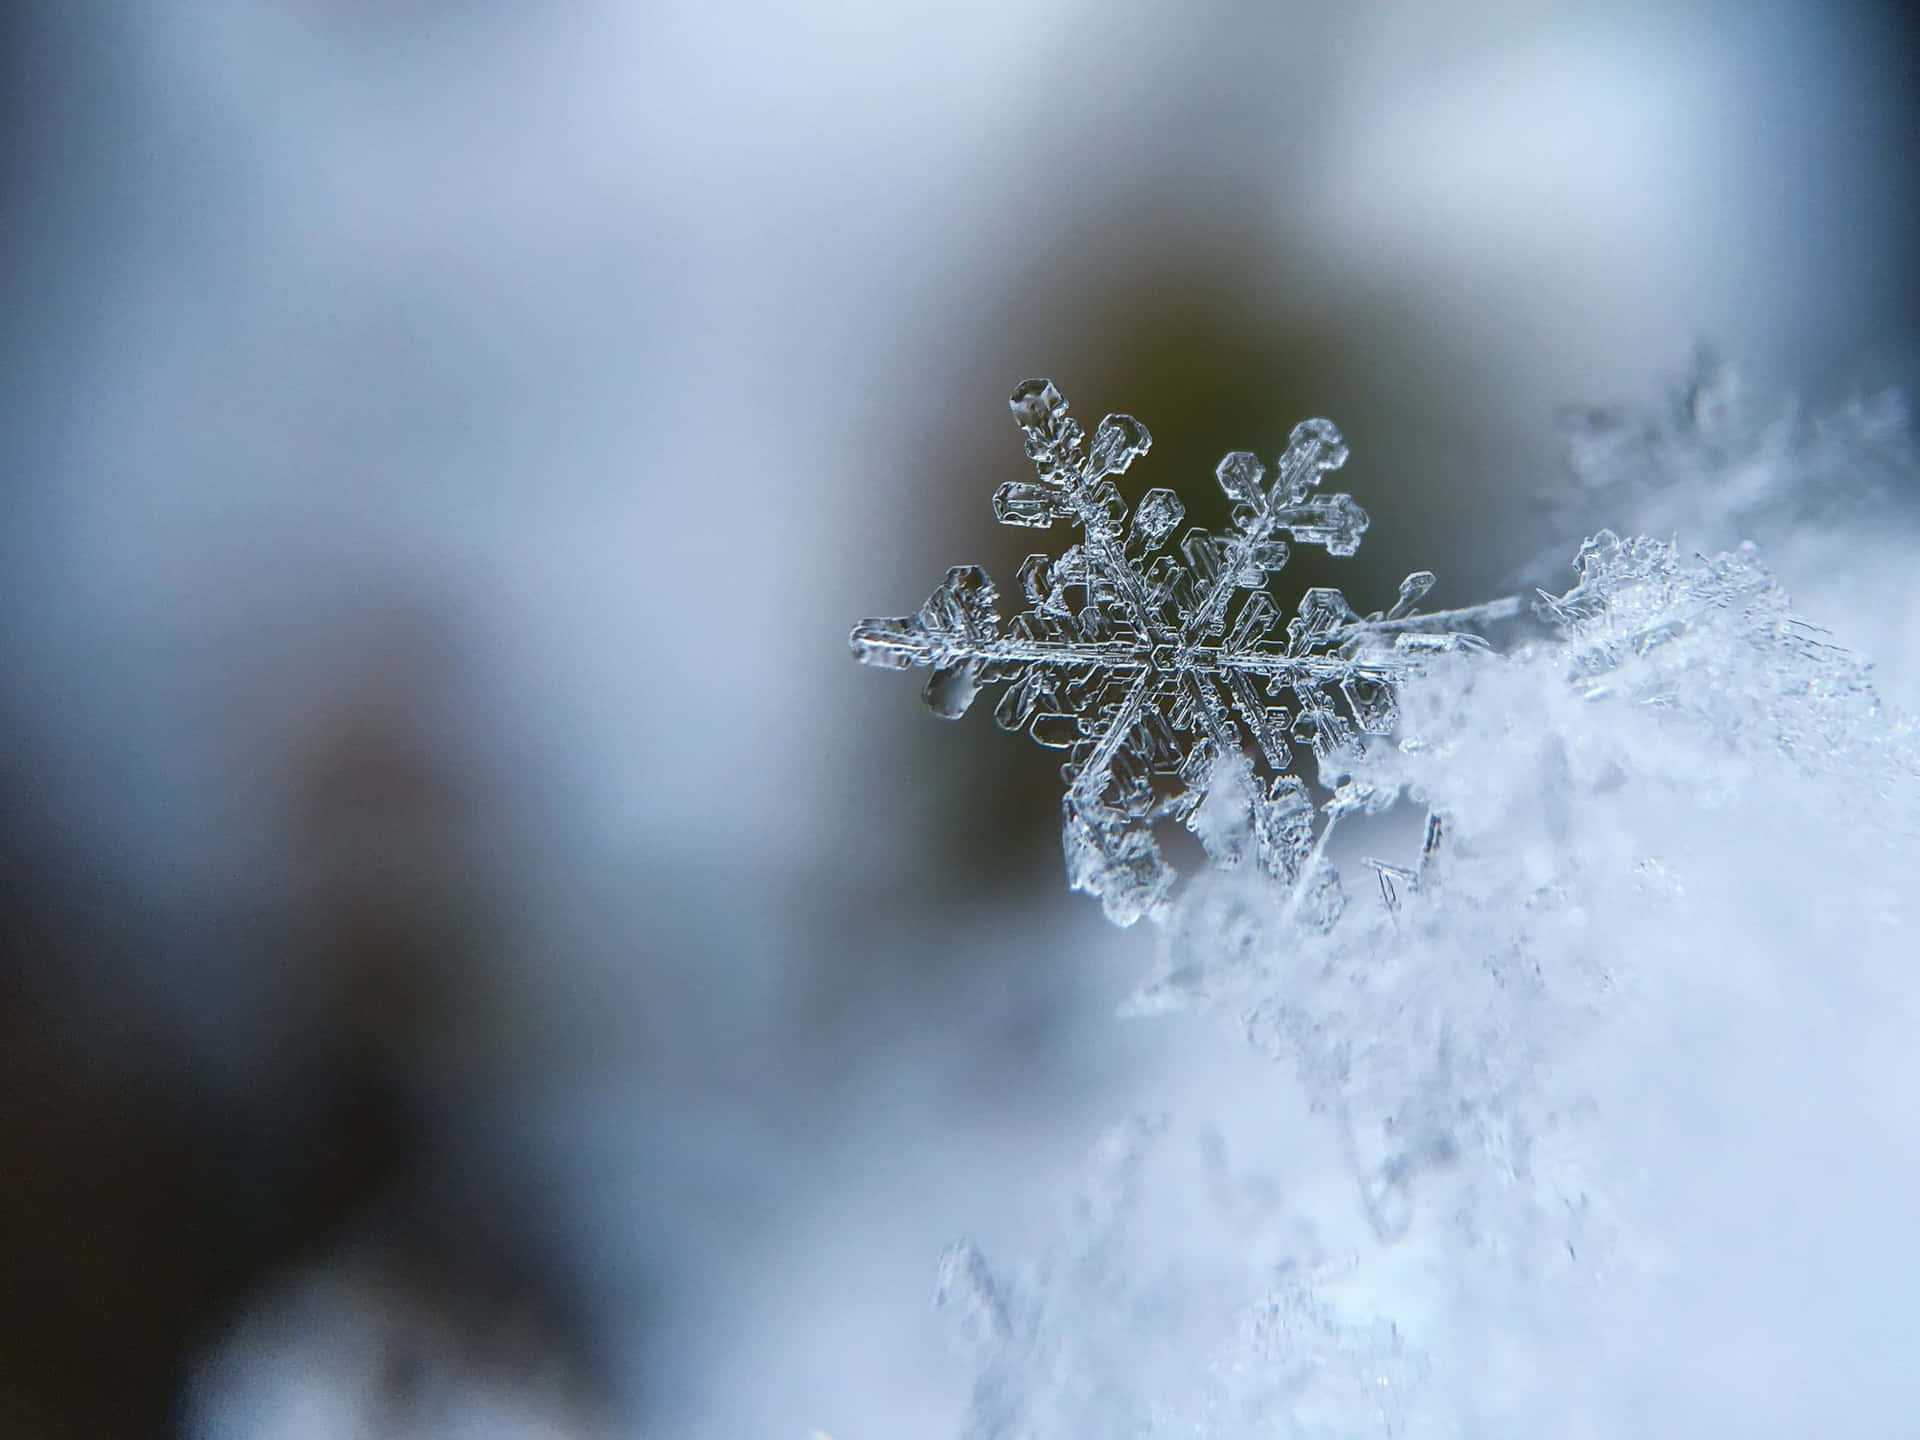 a snowflake is shown on a piece of snow